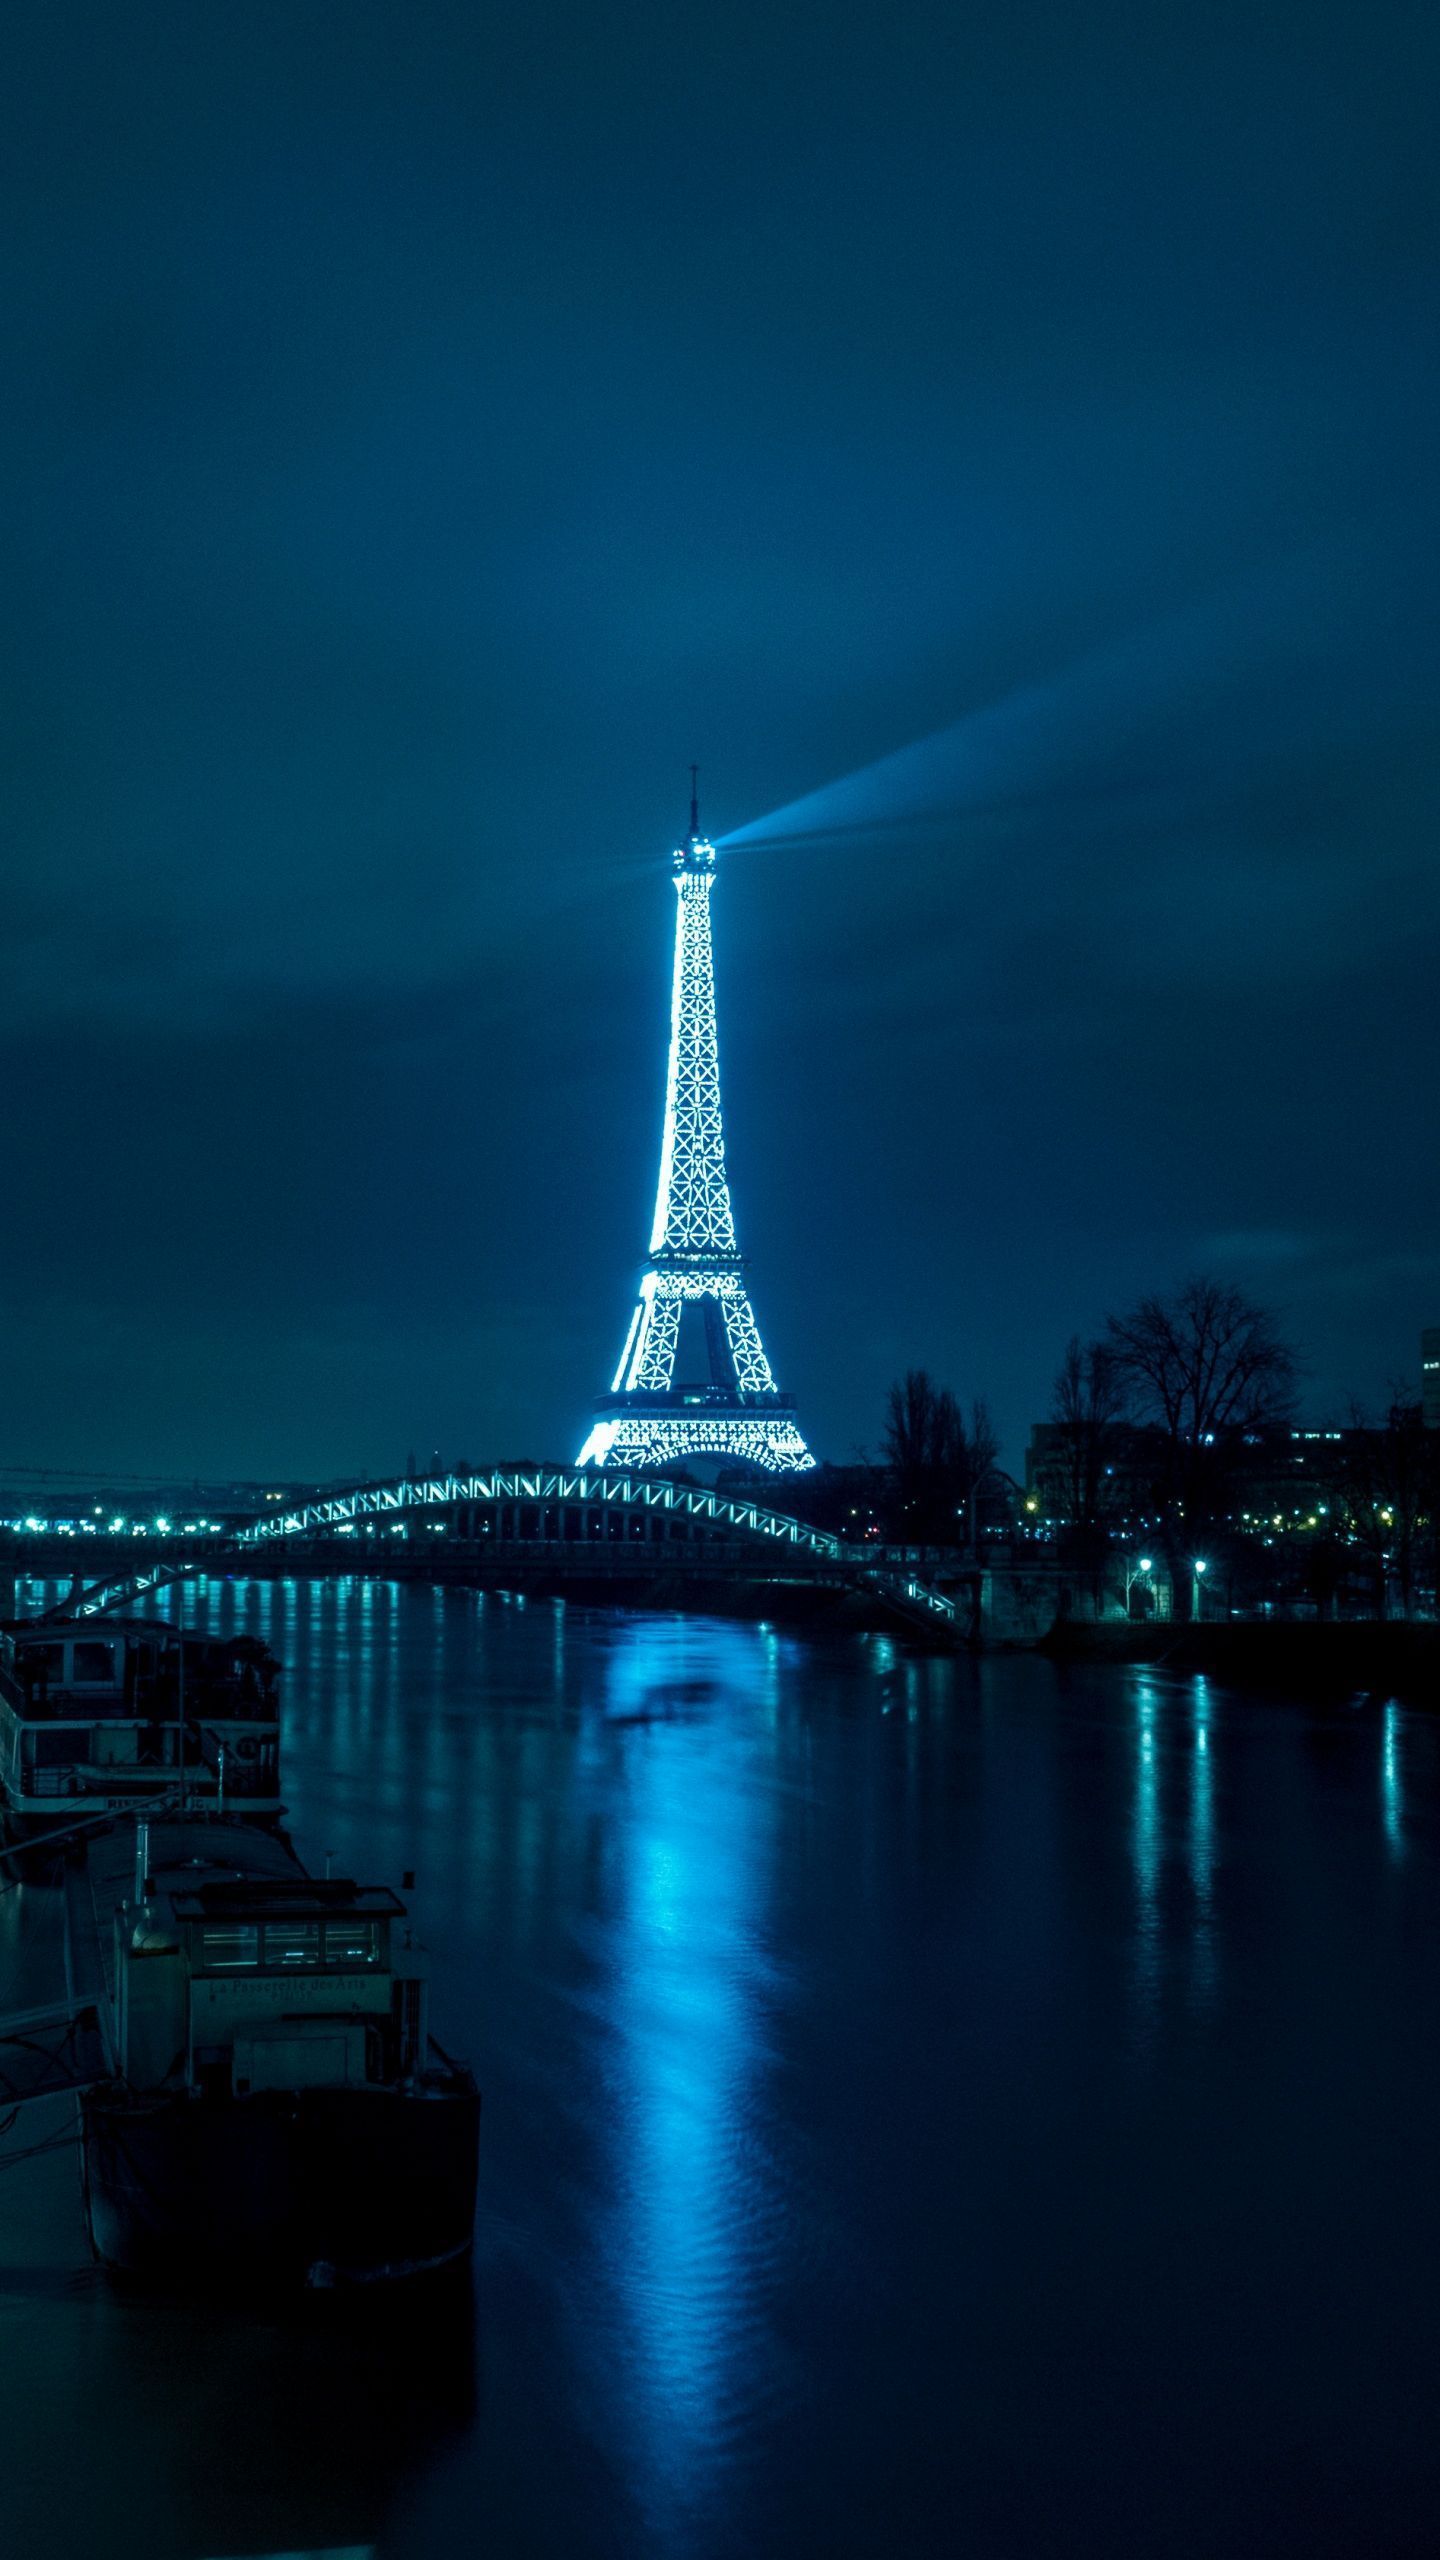 The Eiffel Tower lit up at night, seen from across the river. - Paris, France, Eiffel Tower